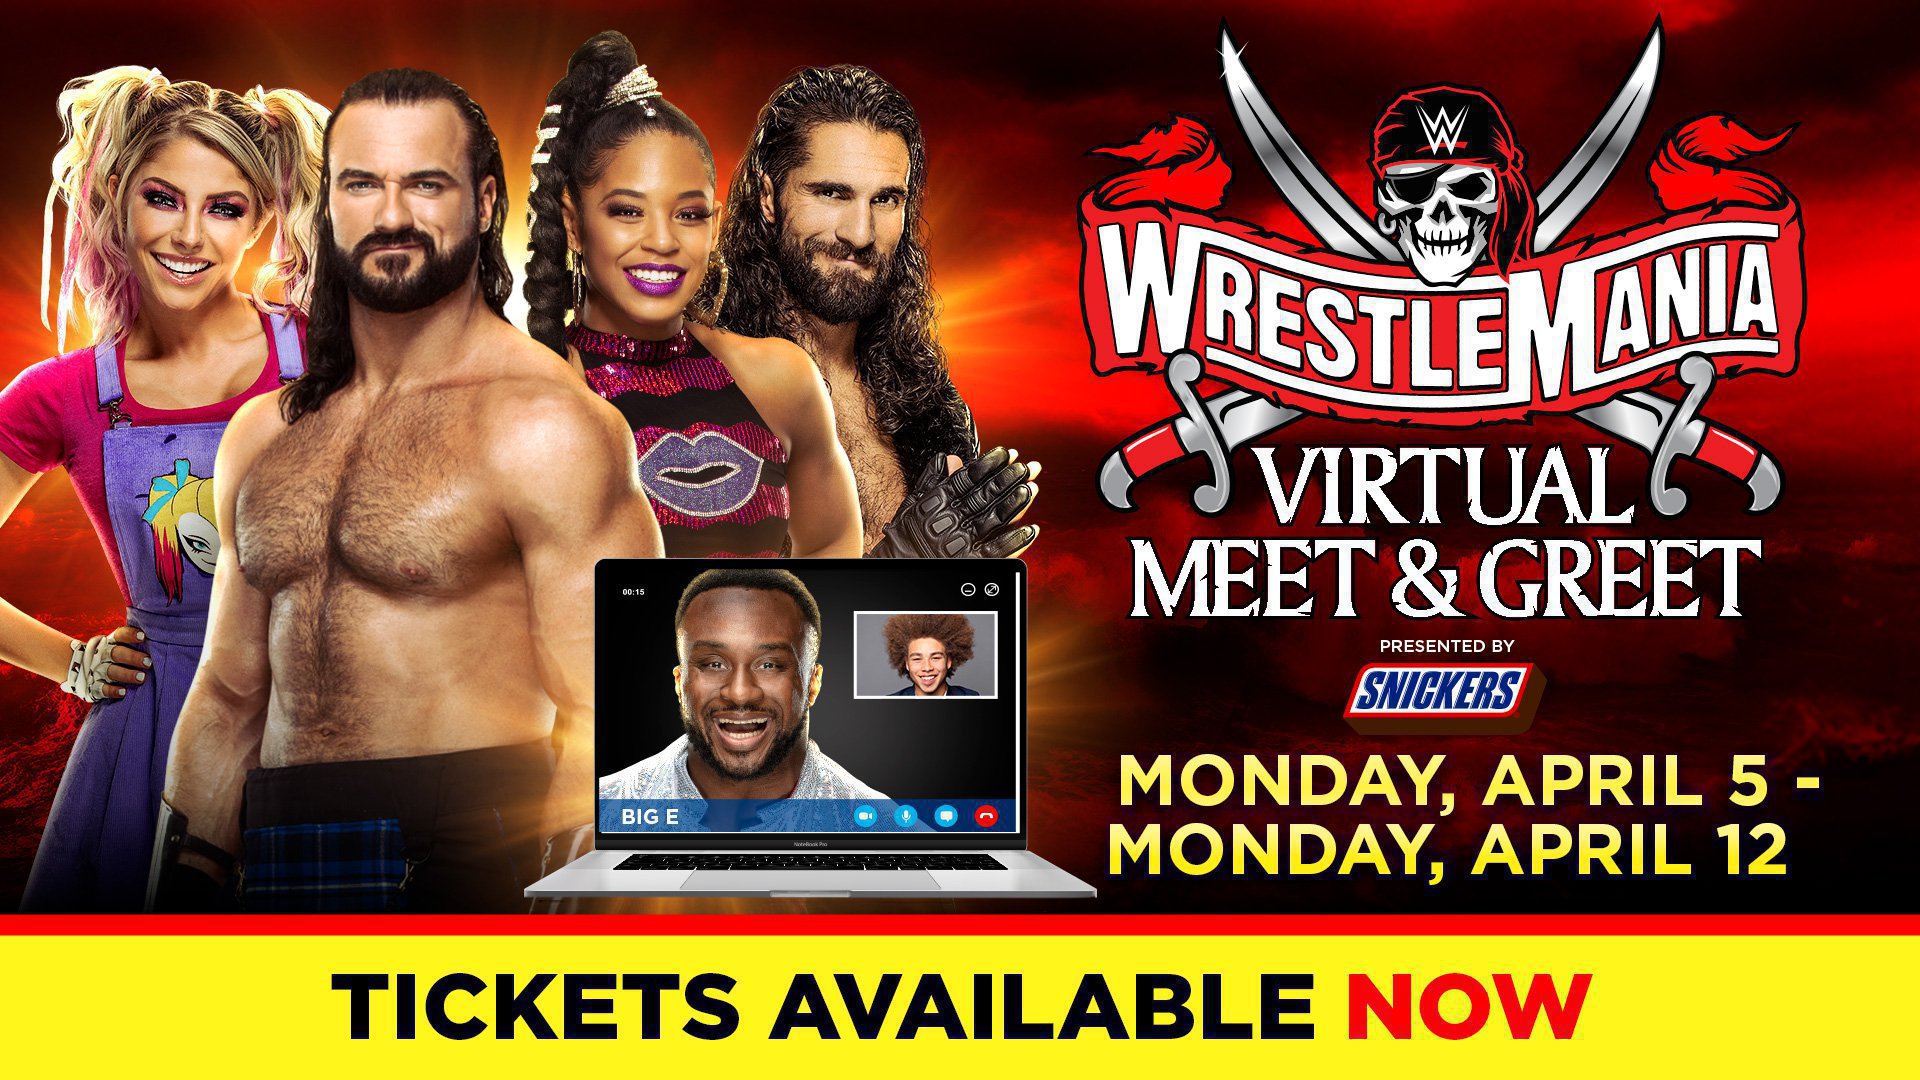 Tickets available now for the largest selection of WWE Virtual Meet & Greets in WWE history